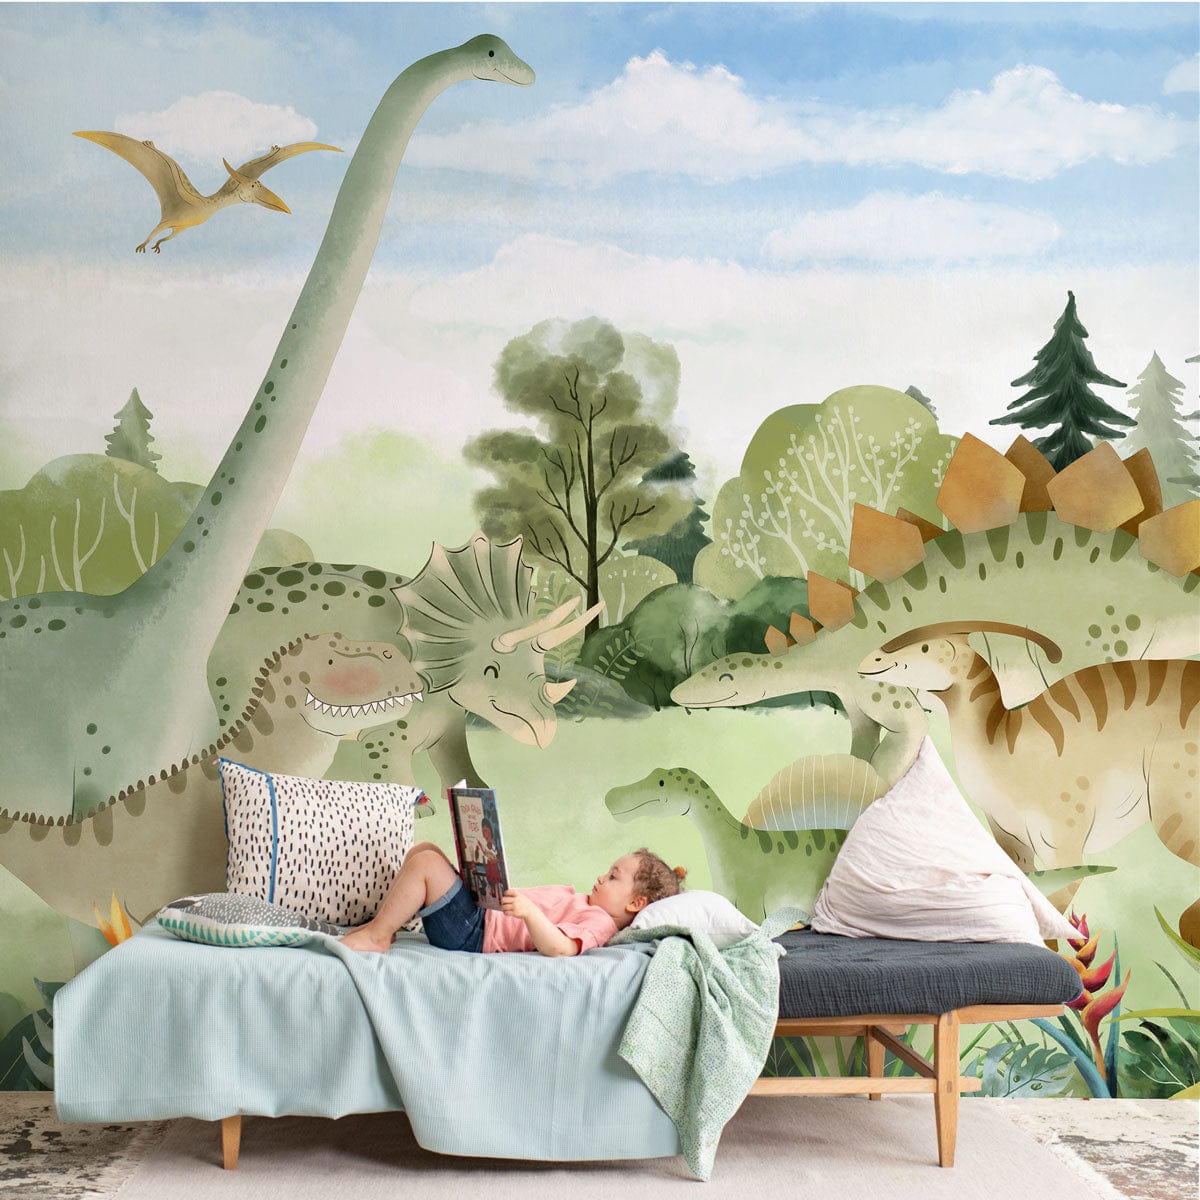 Wallpaper mural featuring dinosaurs engaging in friendly conversation, ideal for use as a decoration in nurseries.